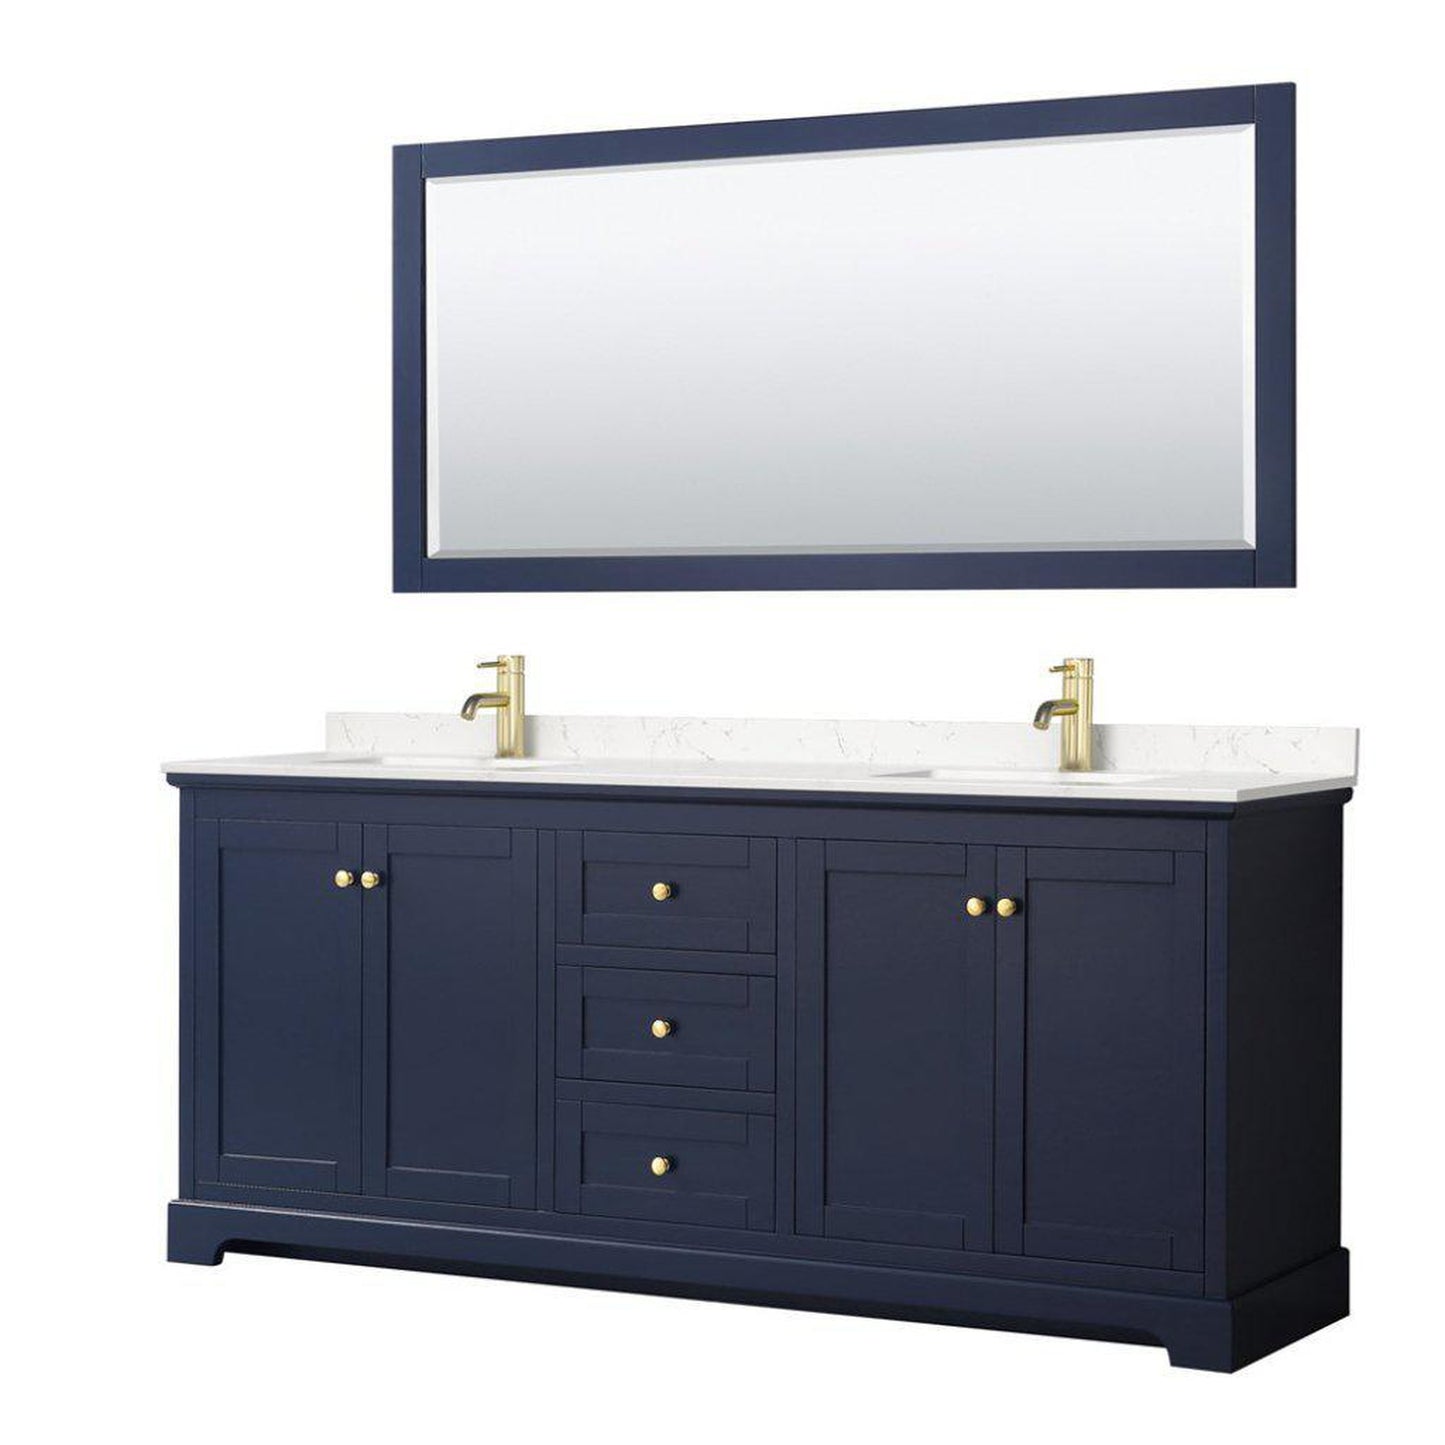 Wyndham Collection Avery 80" Dark Blue Double Bathroom Vanity Set With Light-Vein Cultured Marble Countertop With 1-Hole Faucet And Square Sink And 70" Mirror